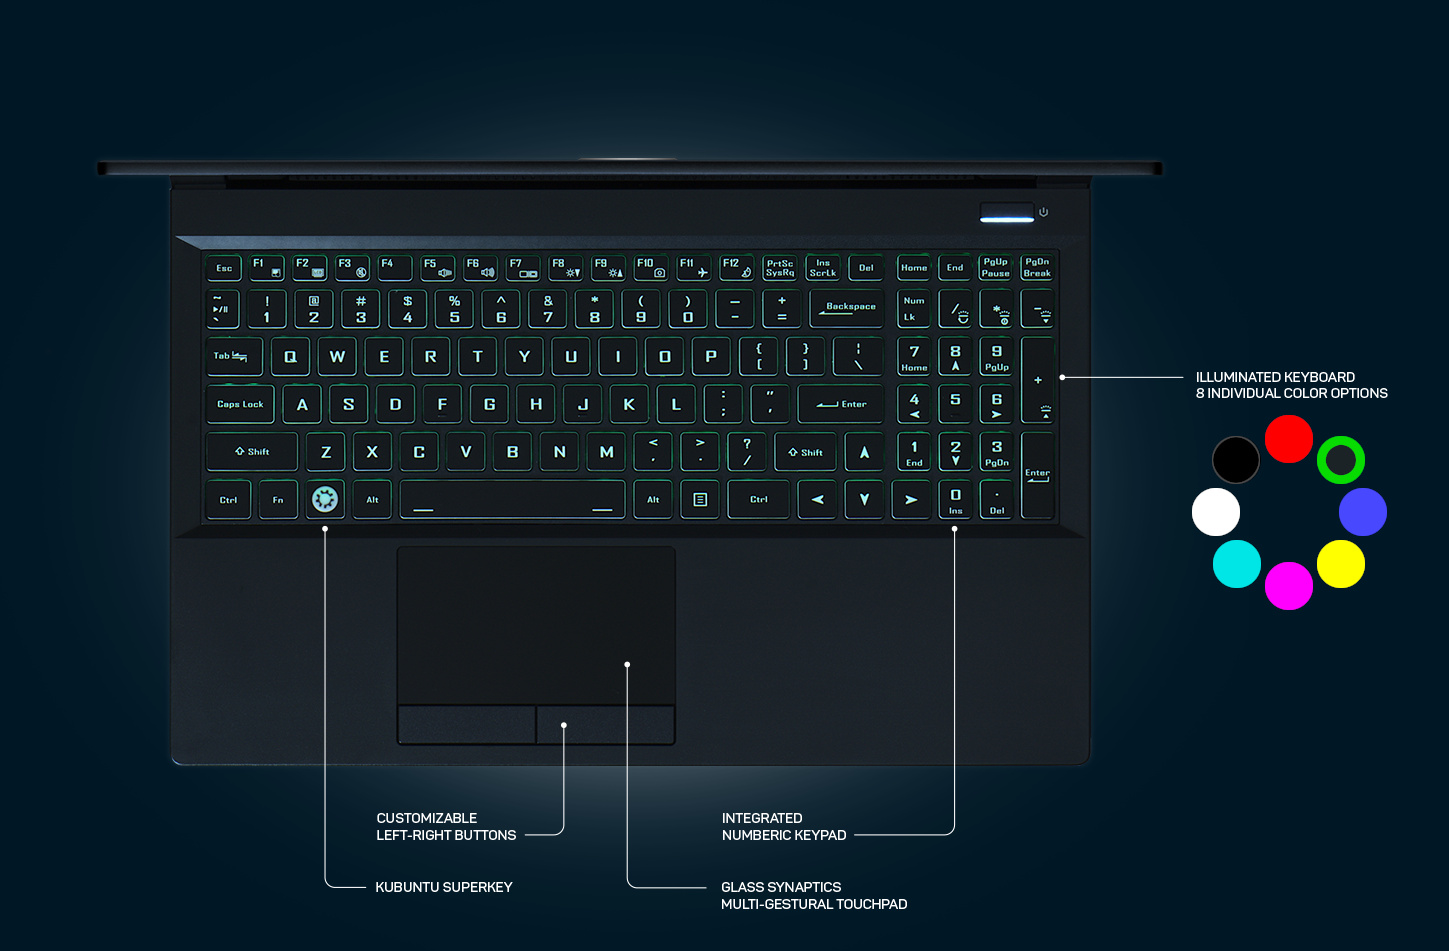 Keyboard Colors and Touchpad